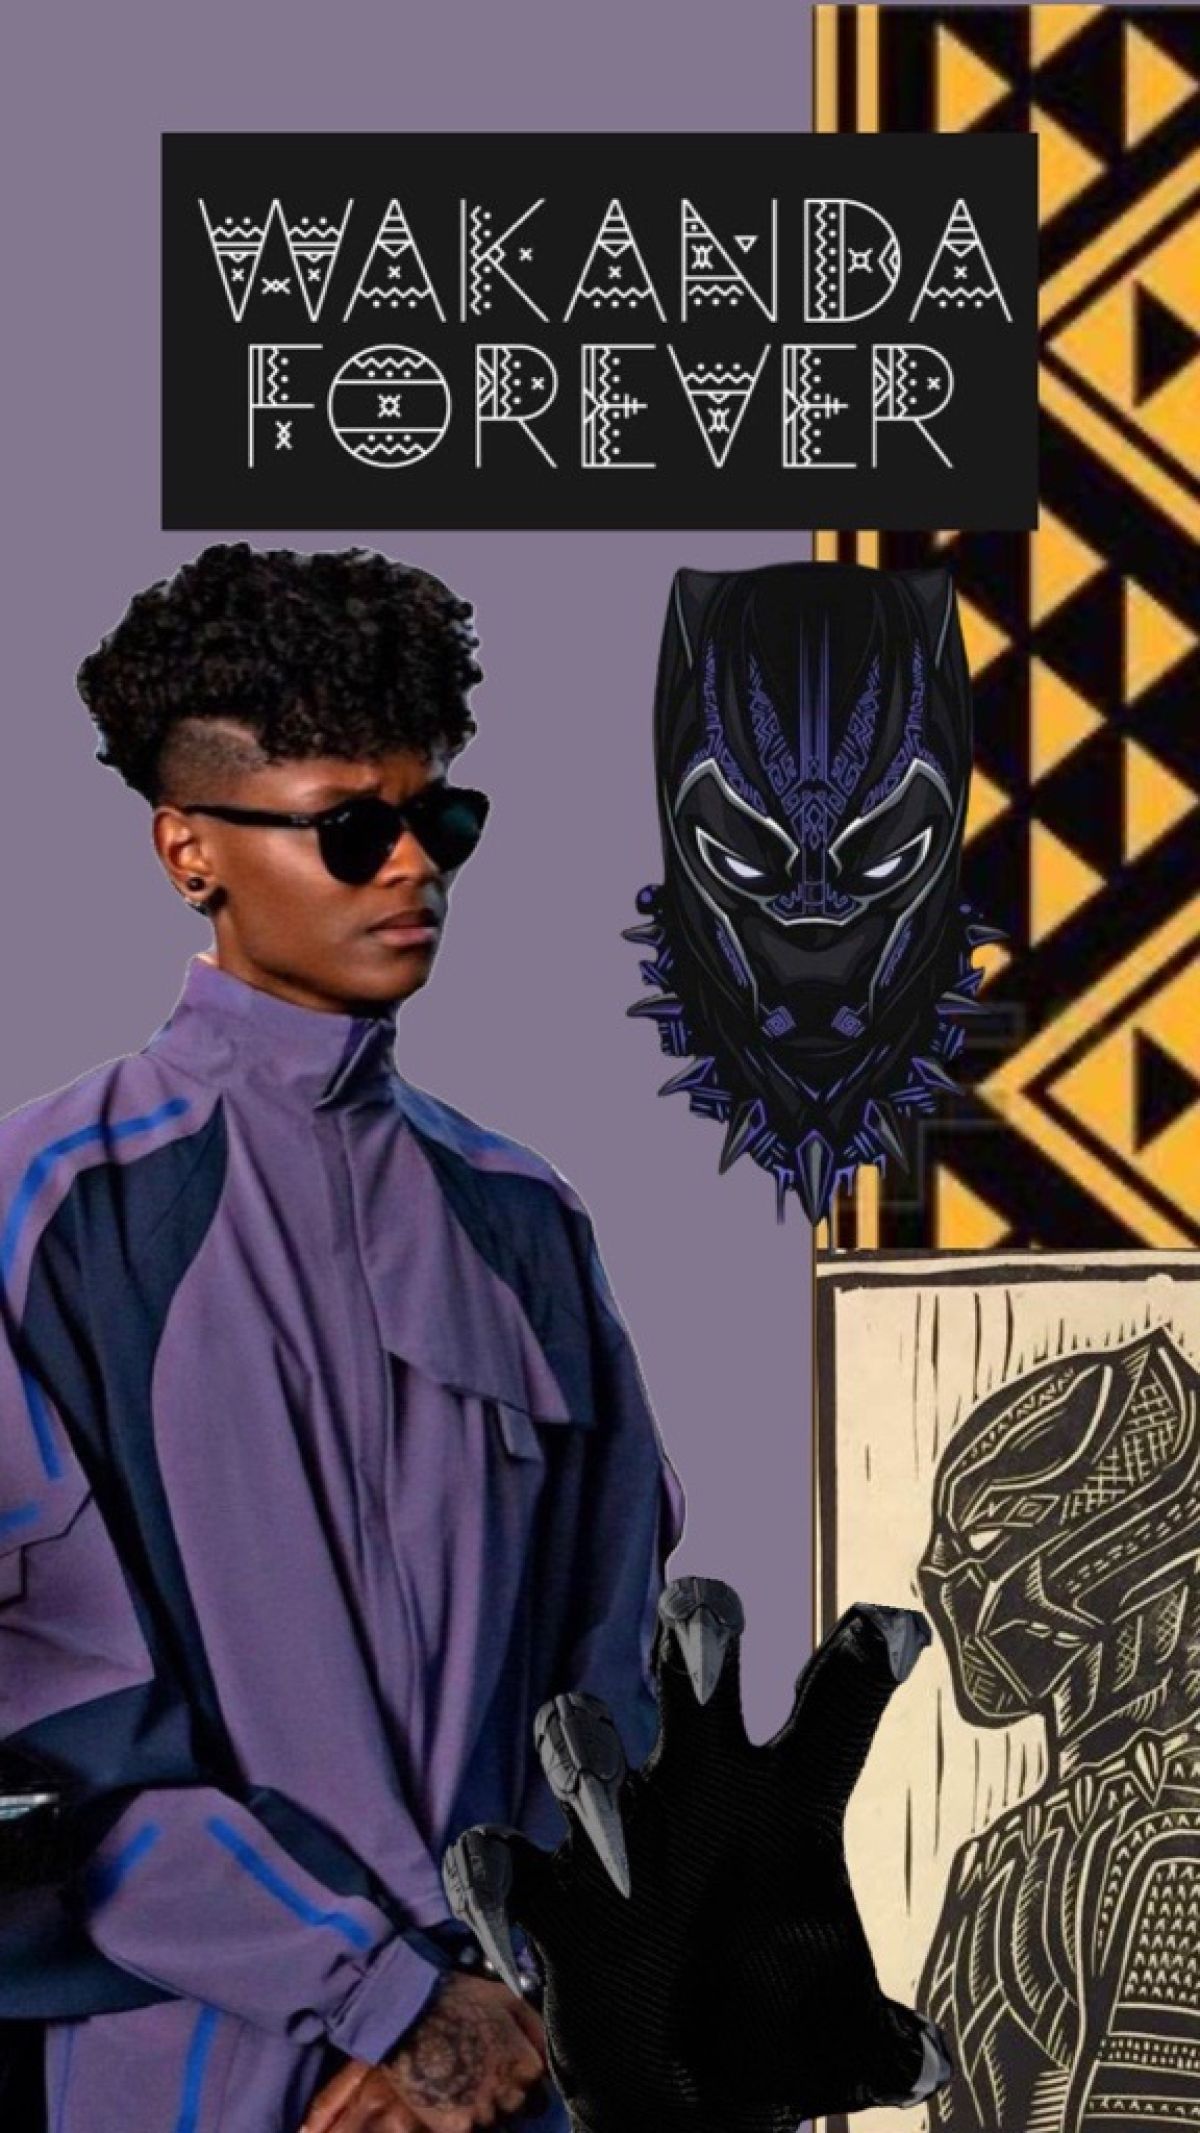 Black Panther Wakanda Forever: A tribute to a beloved actor